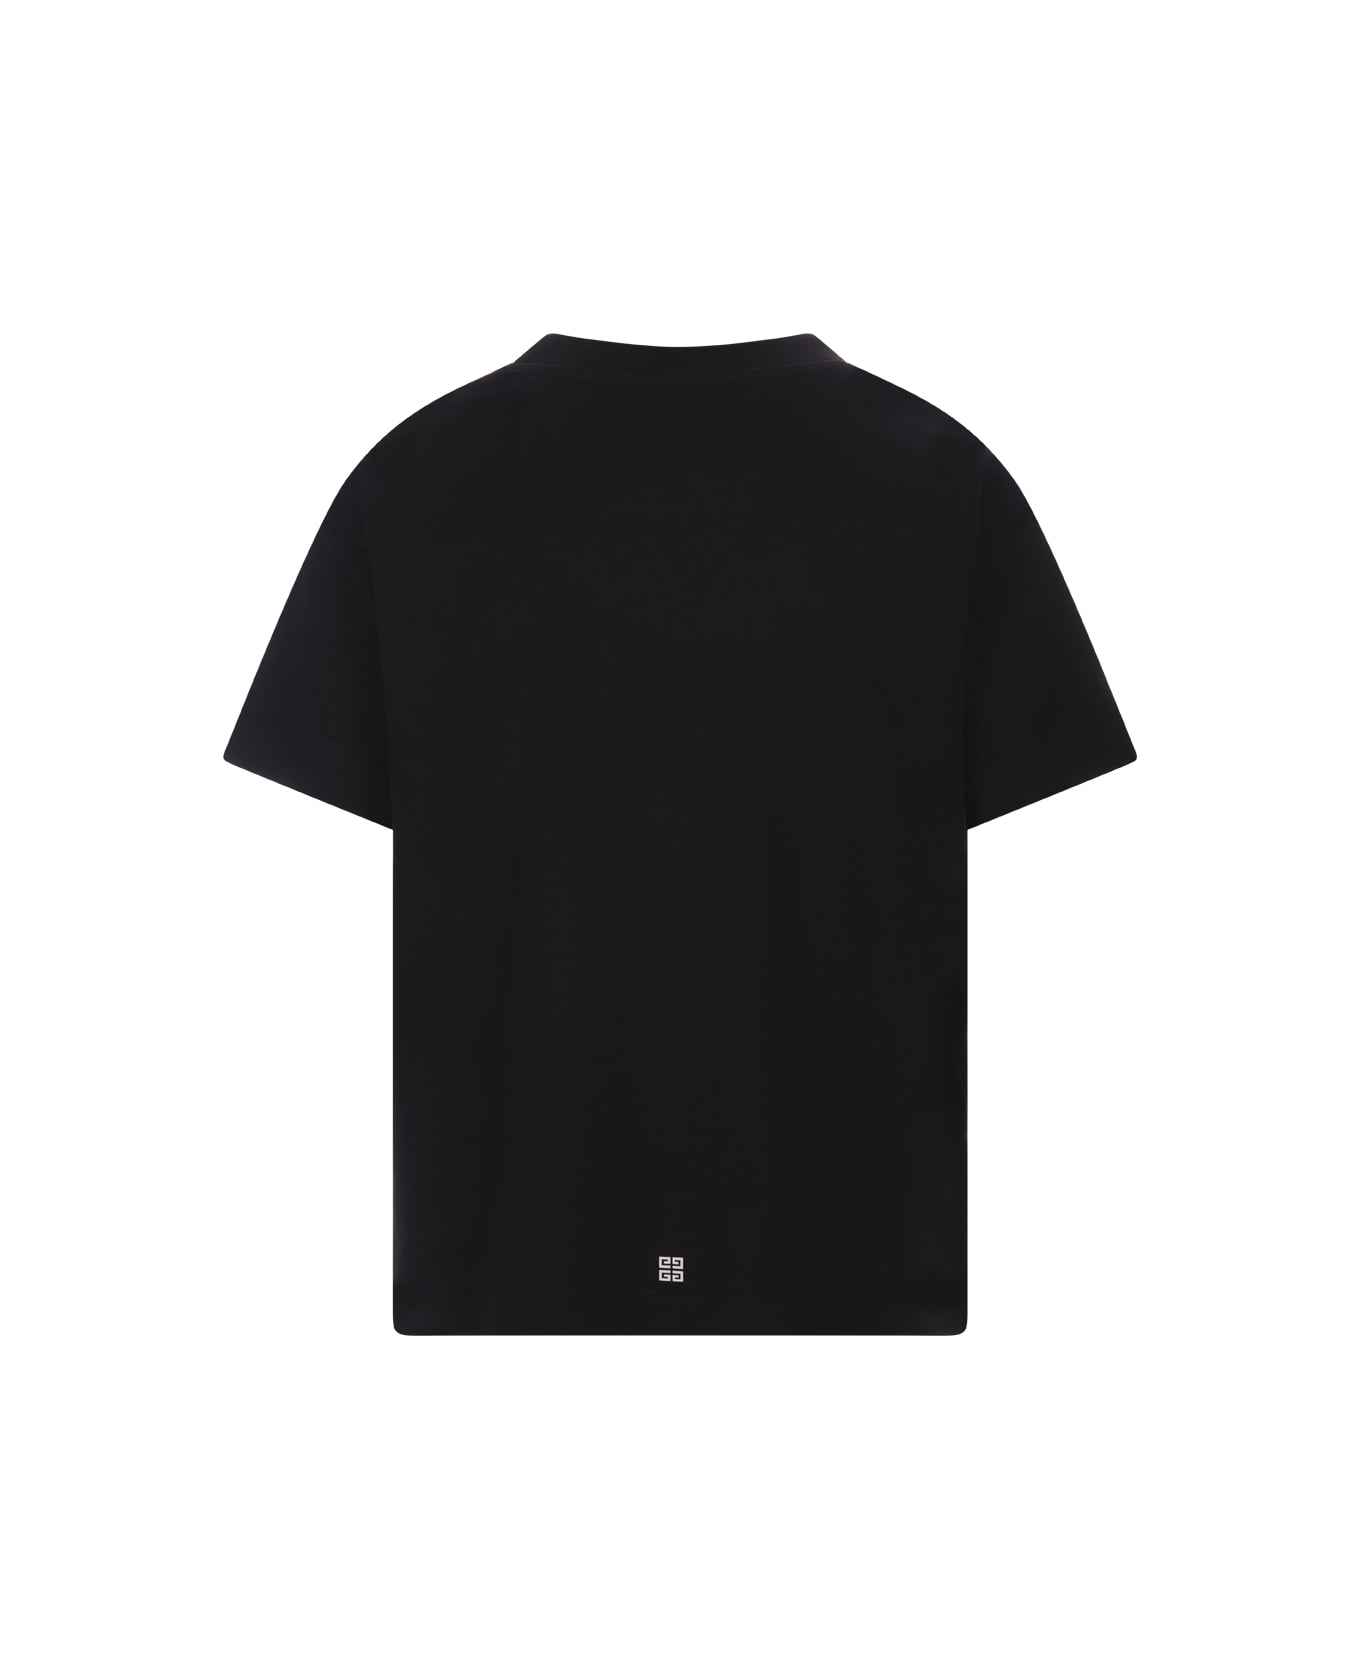 Givenchy Loose T-shirt In Black Cotton With Reflective Pattern - Black